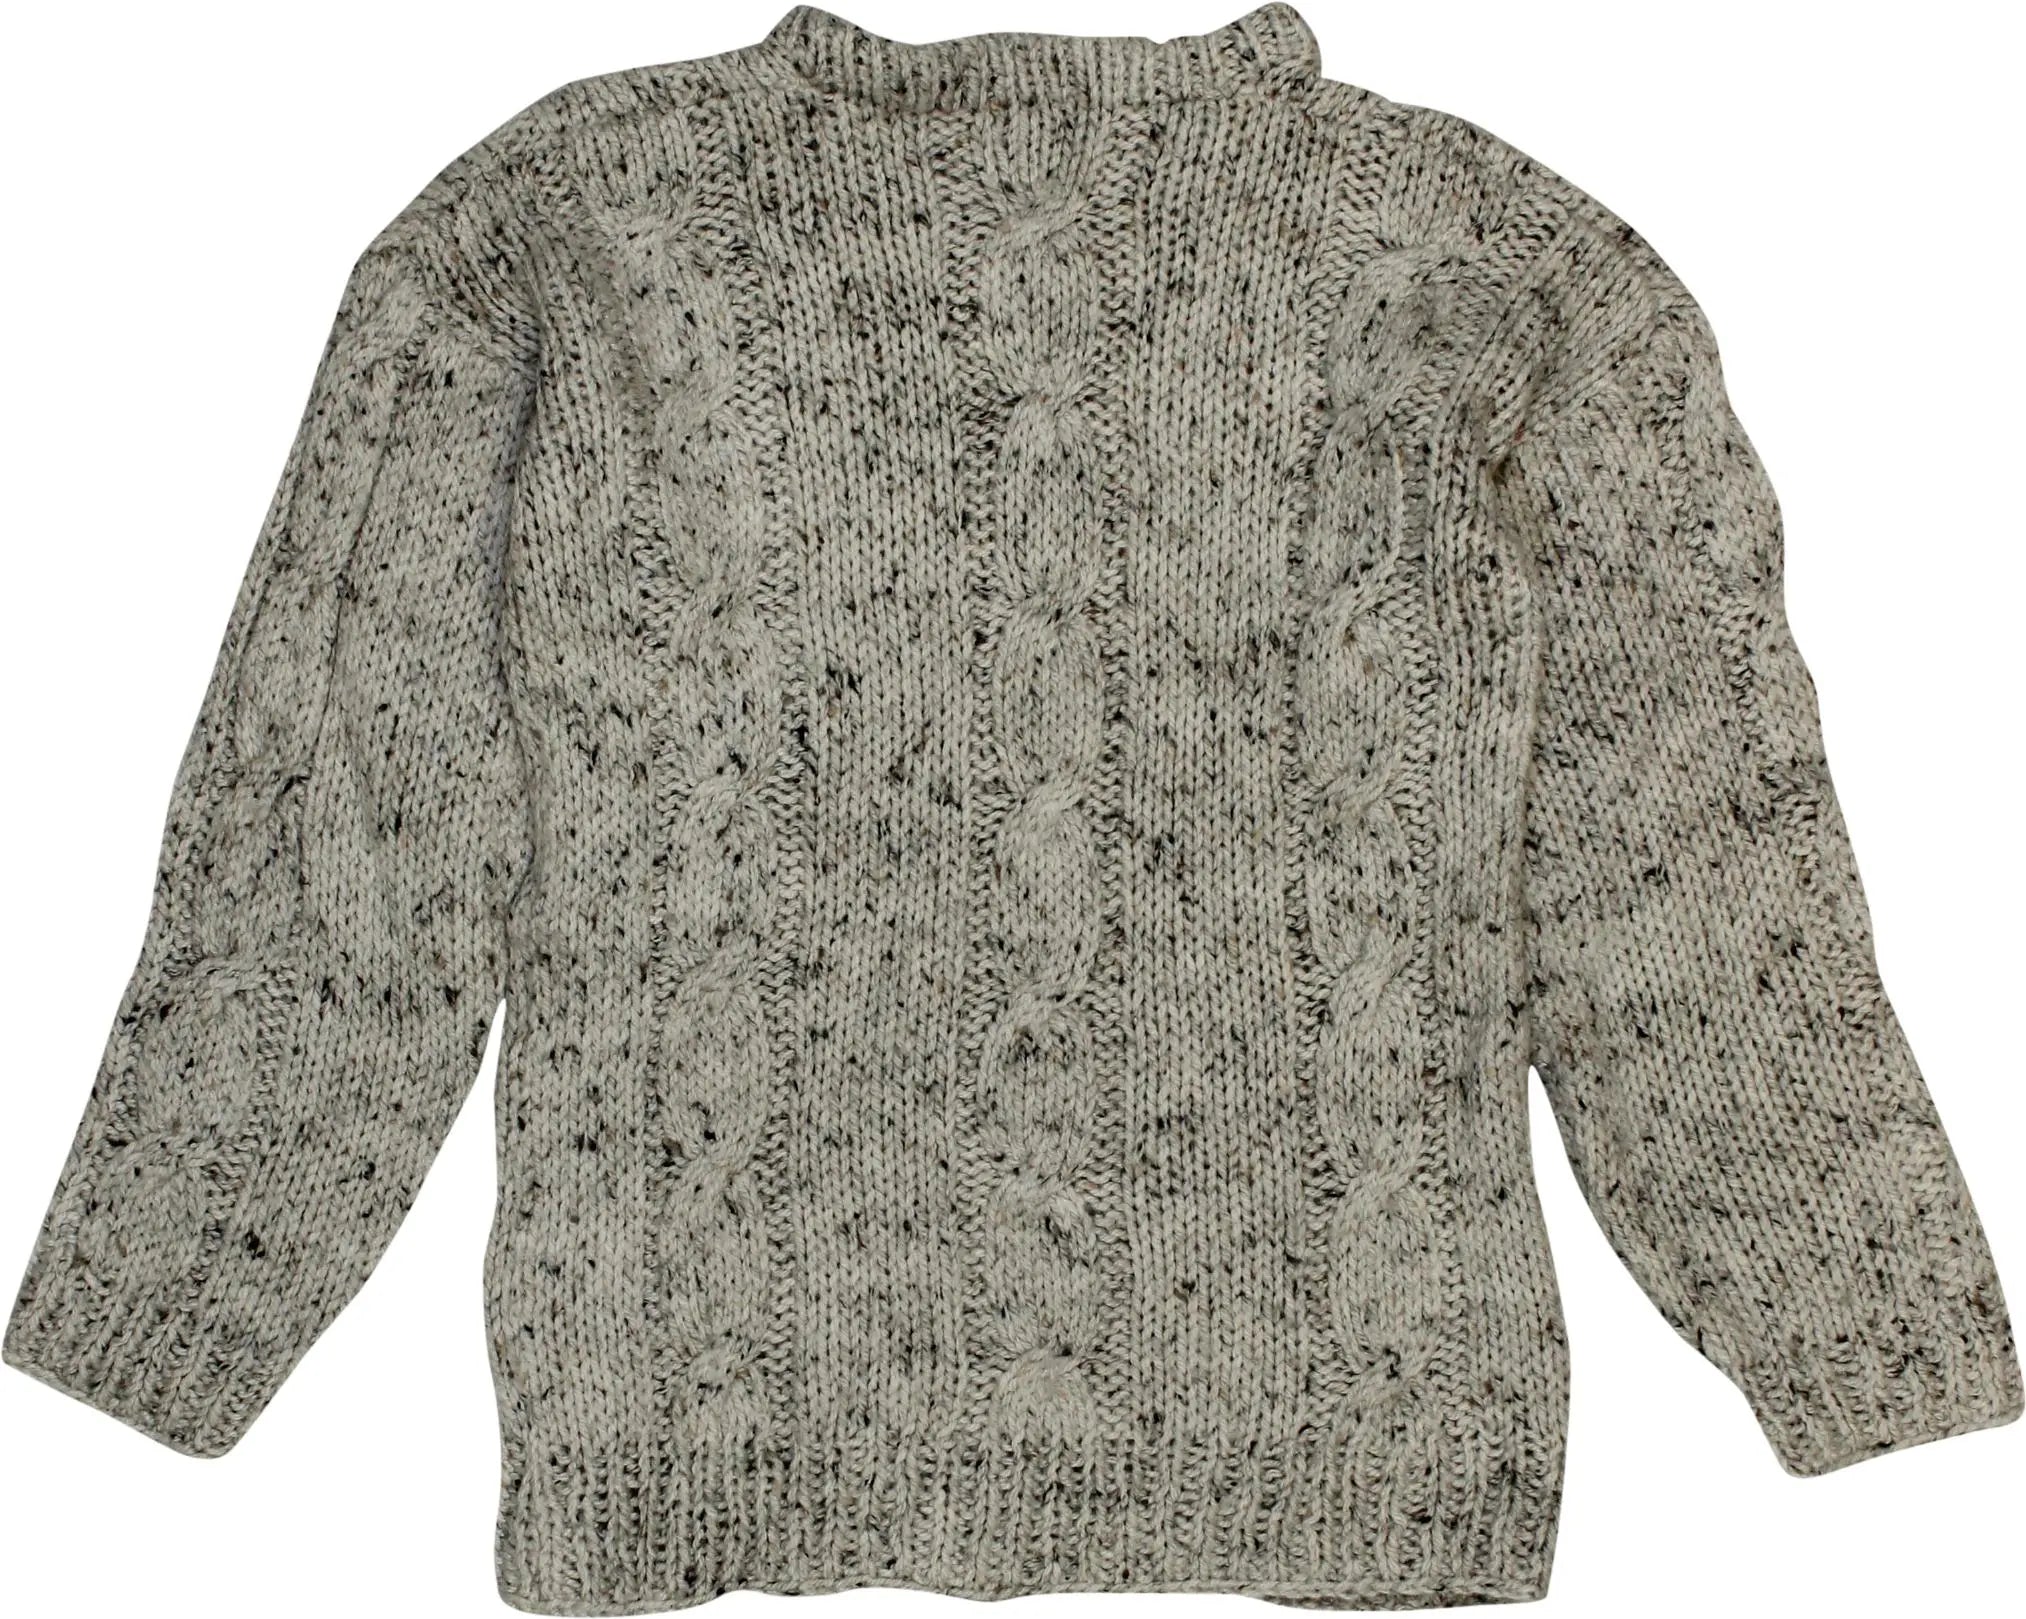 Unknown - Grey Knitted Cable Jumper- ThriftTale.com - Vintage and second handclothing